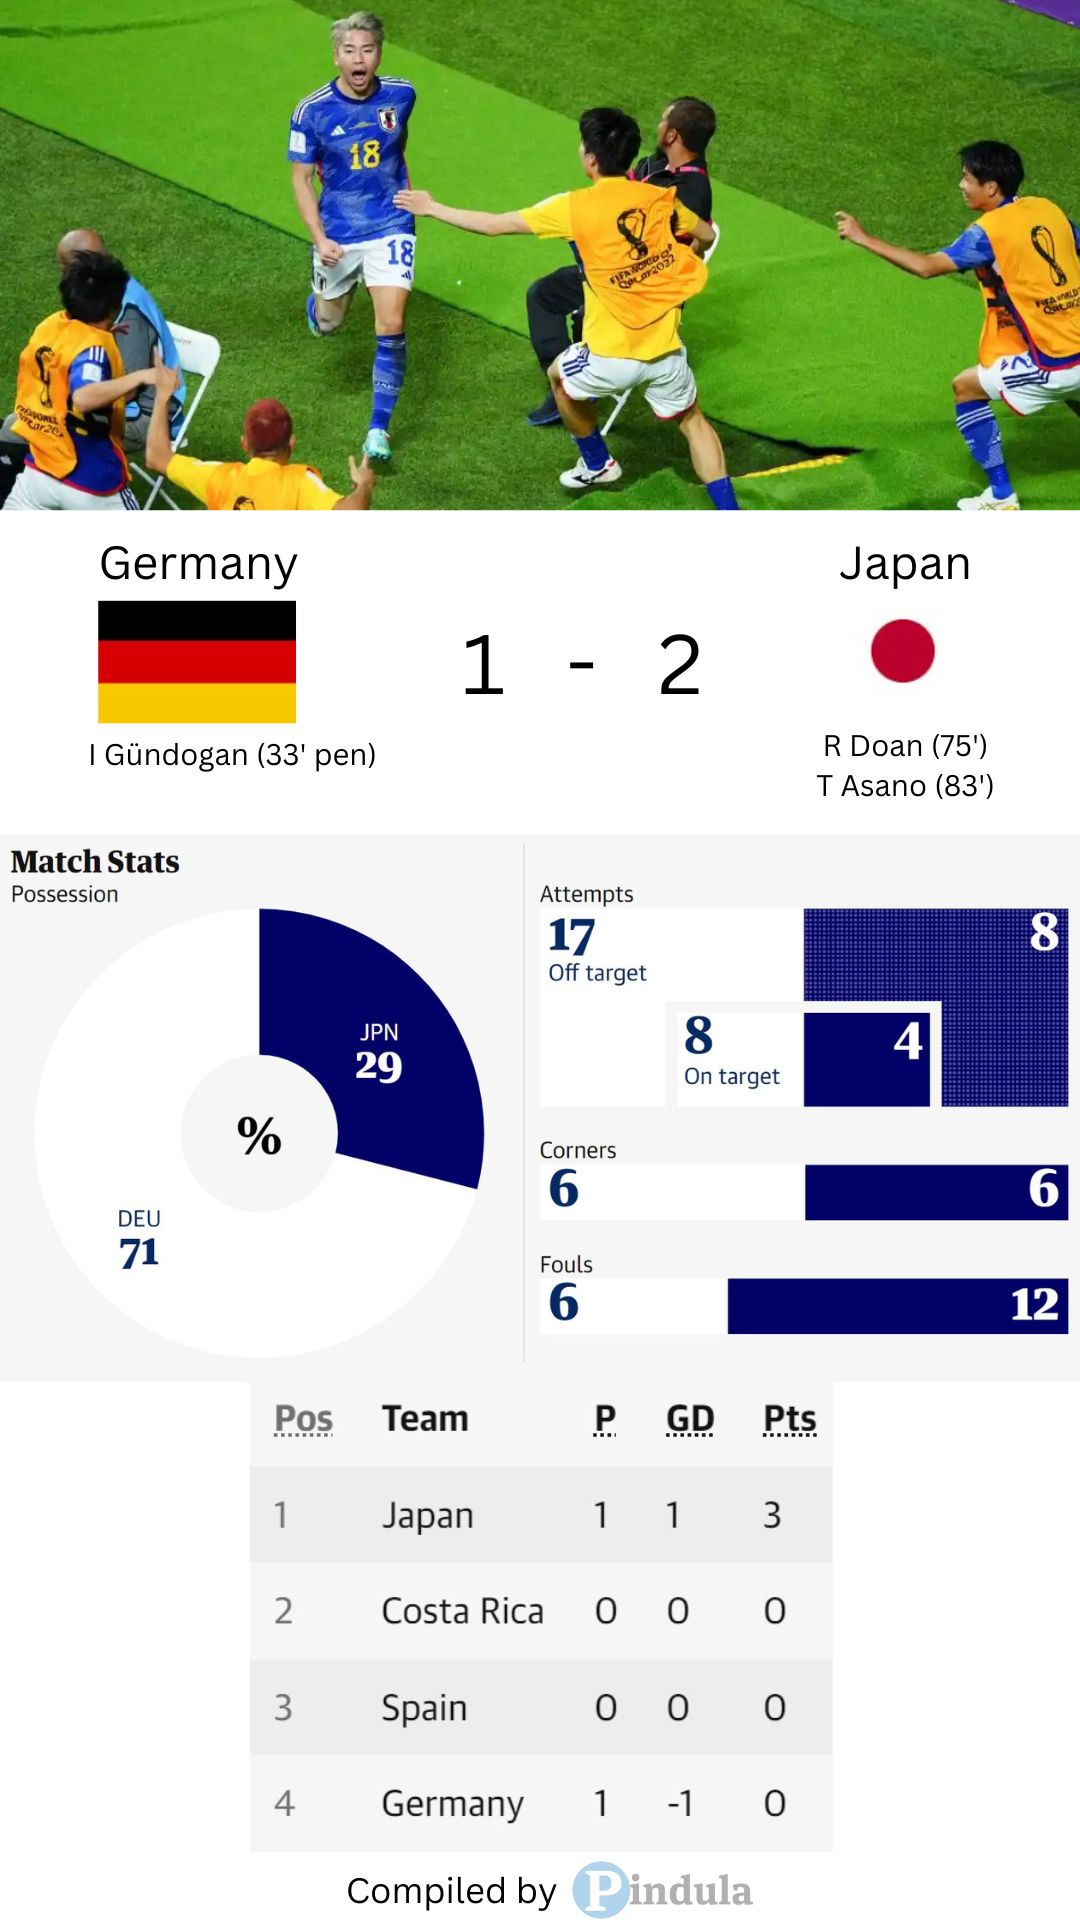 Japan stunned Germany with a late comeback in their World Cup opener, with goals from Ritsu Doan and Takuma Asano seeing them win 2-1.

Japan had never previously beaten their European opponents, but they capitalised on German errors and missed chances to secure a famous victory in the first game of Group E. Credit - Skysports.